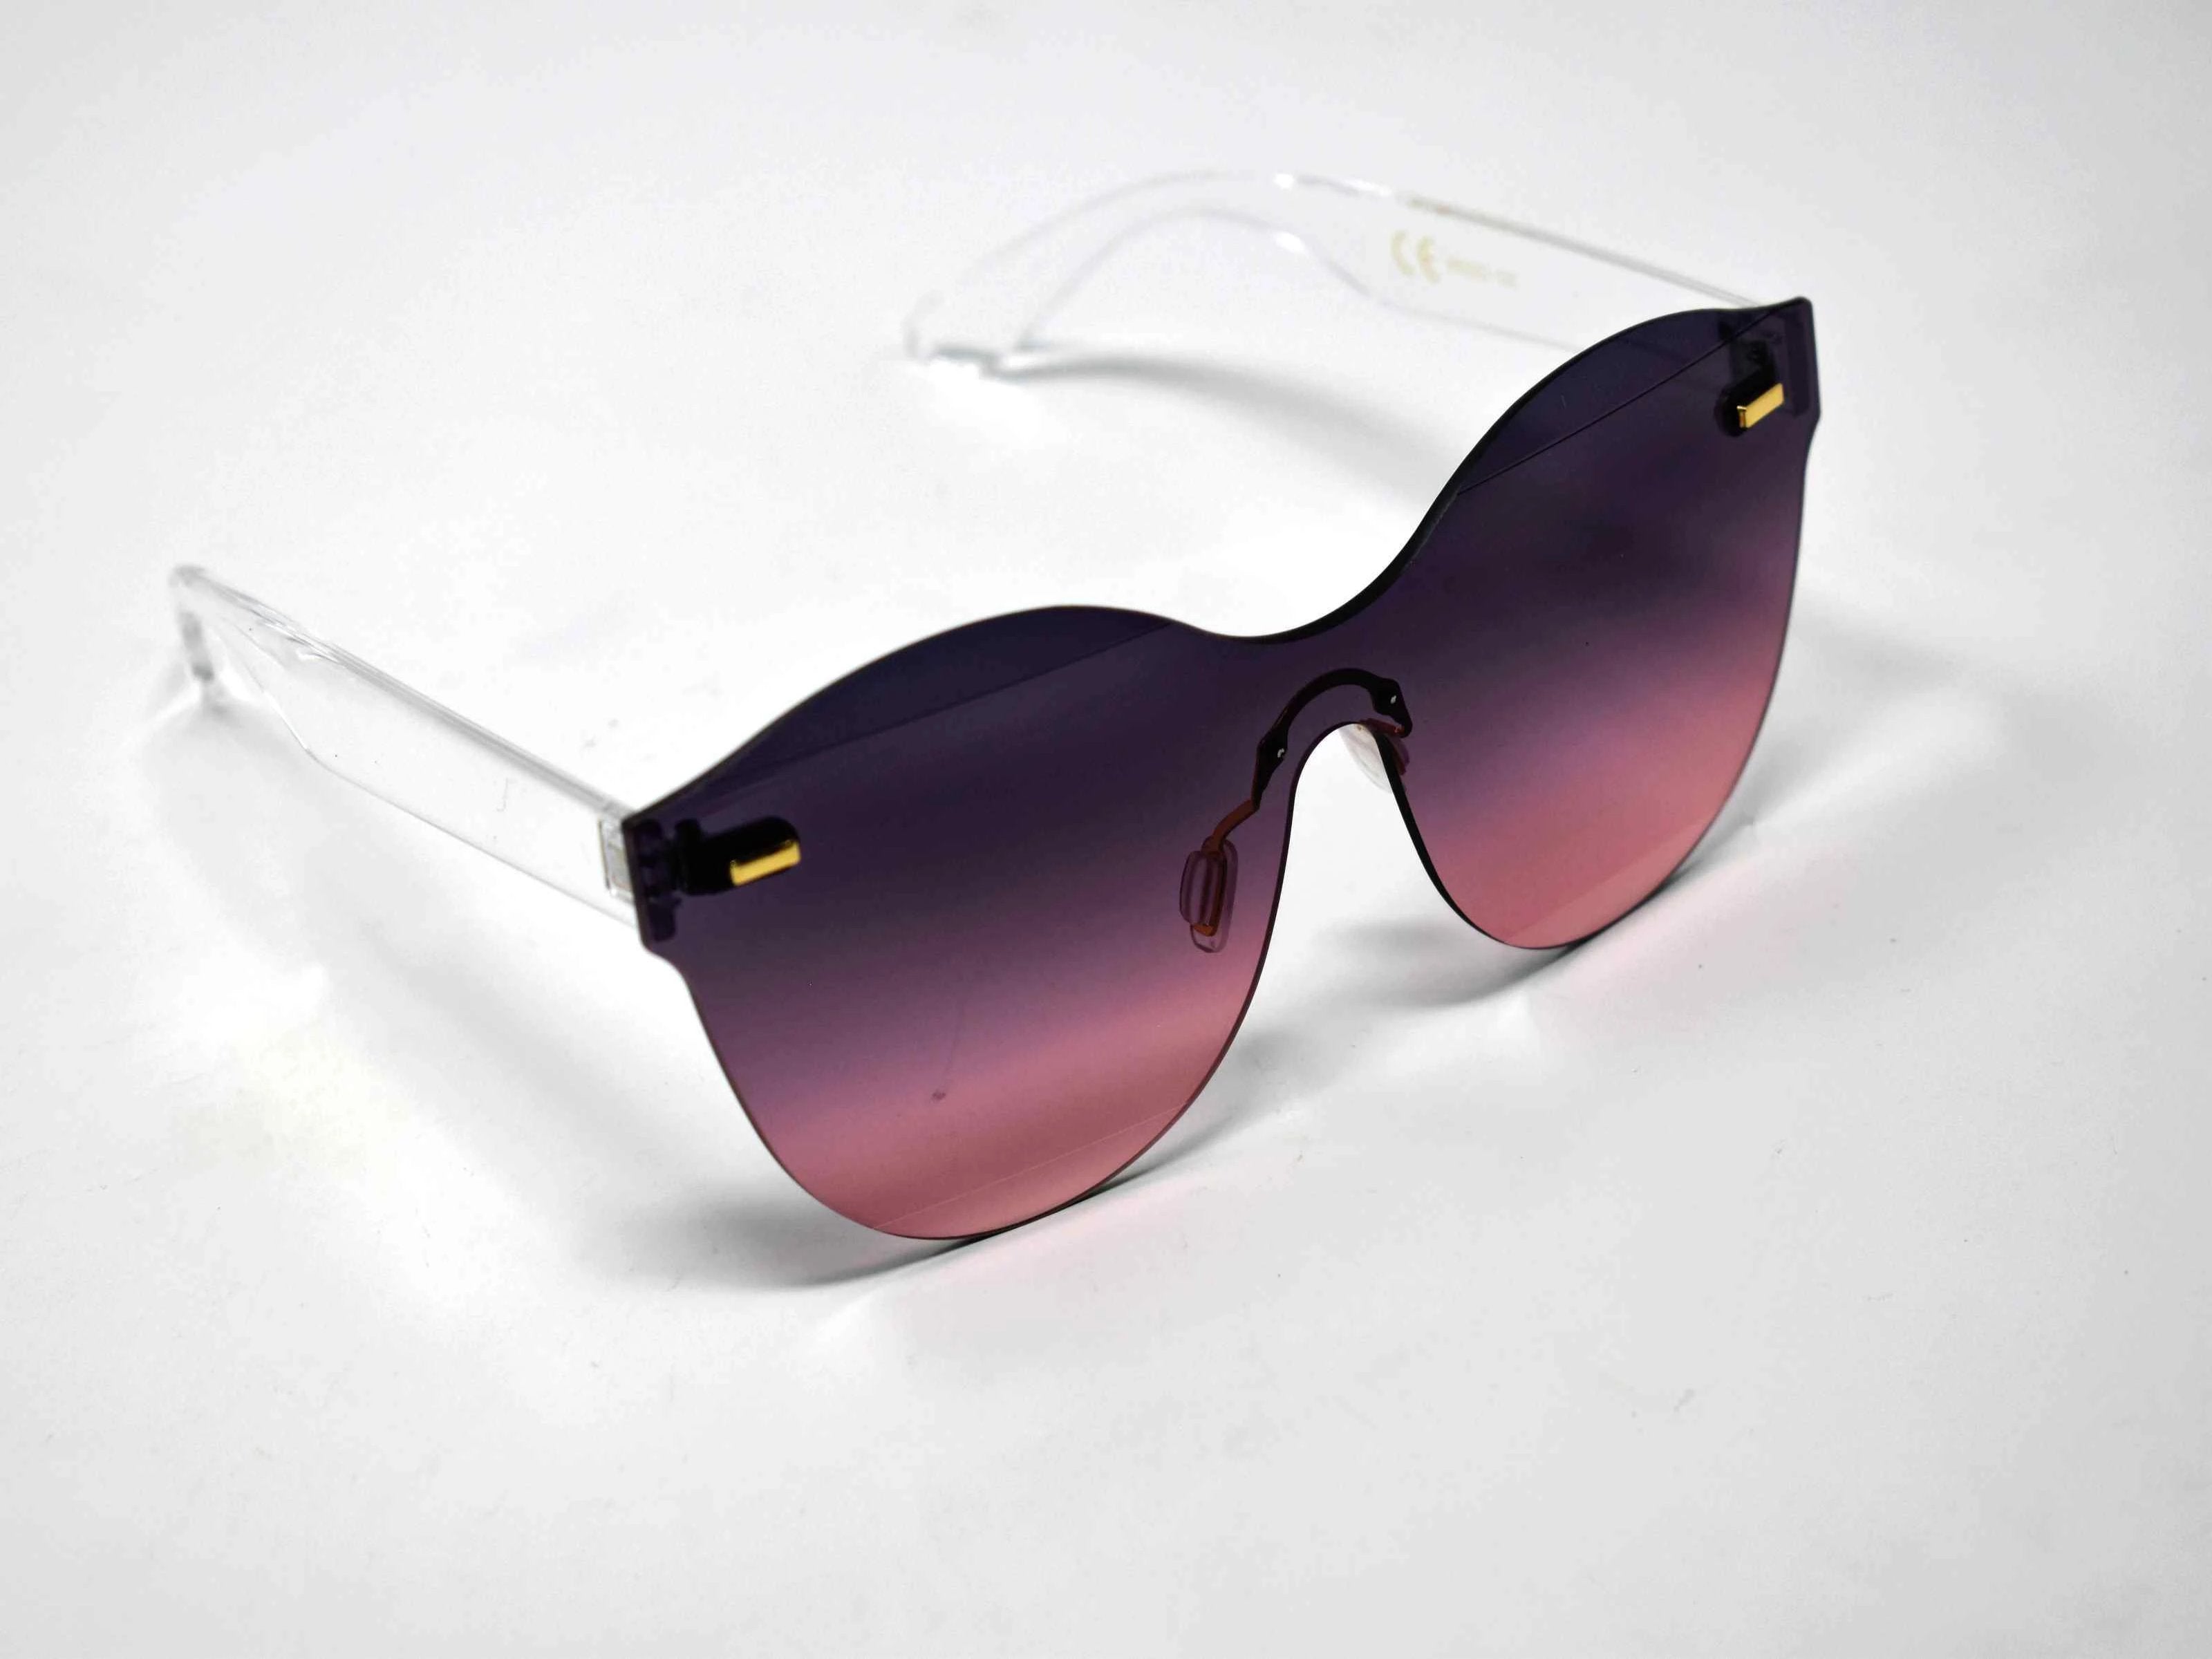 Its just a good vibe in these sage no rim sunglass frames with a plum to pink ombre lens.